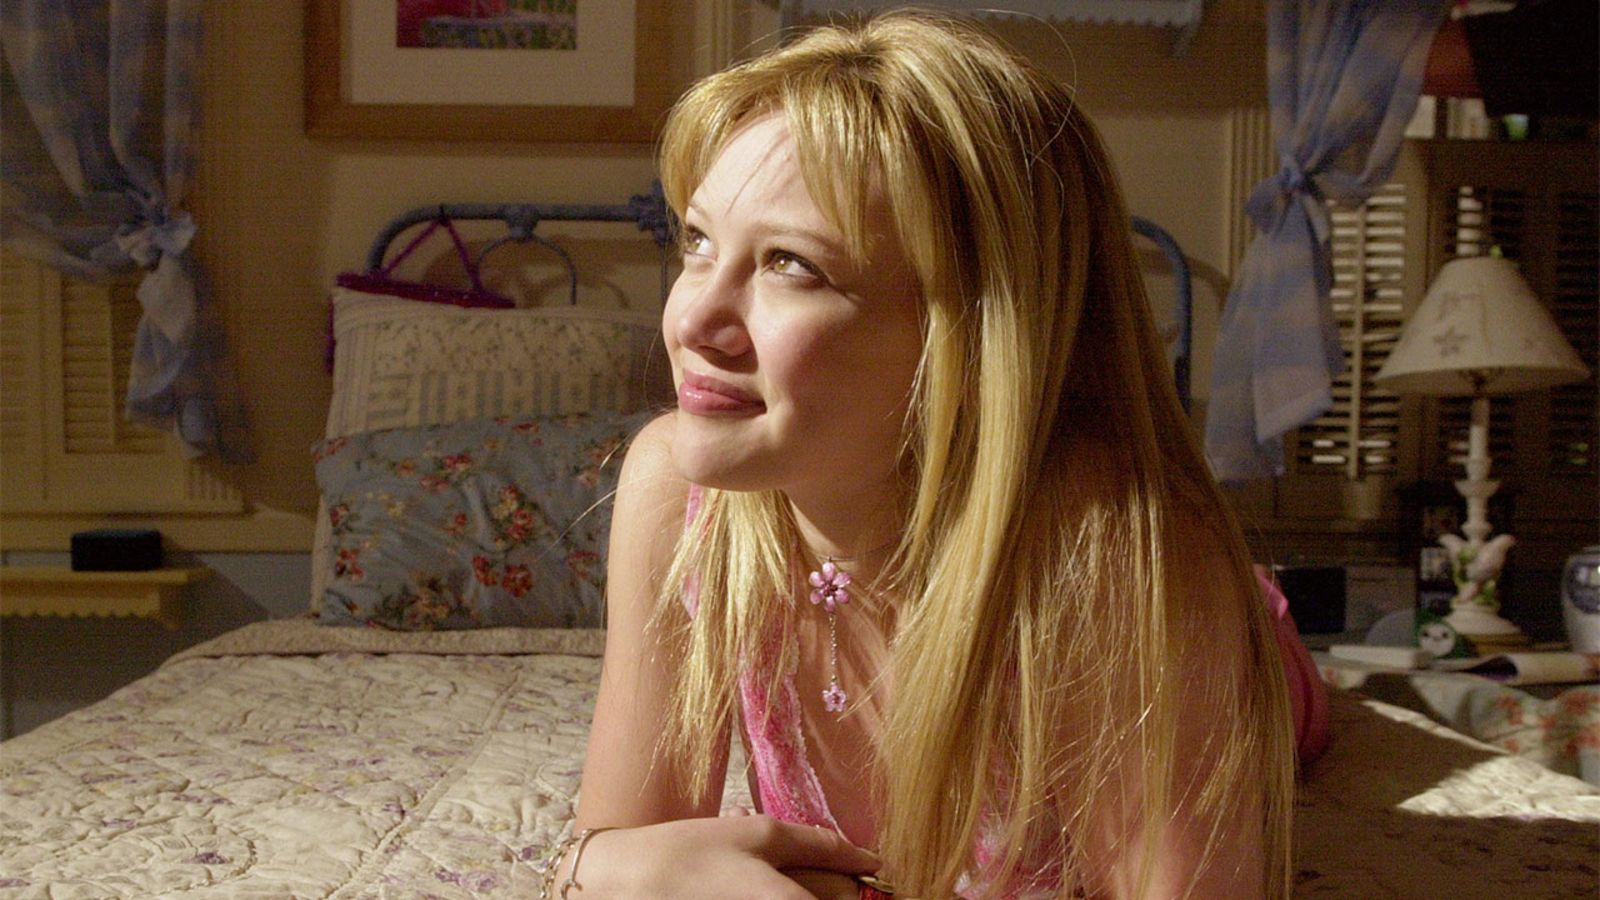 Hilary Duff returning for 'Lizzie McGuire' reboot on Disney Plus streaming service, Disney announces at D23 2019 Expo